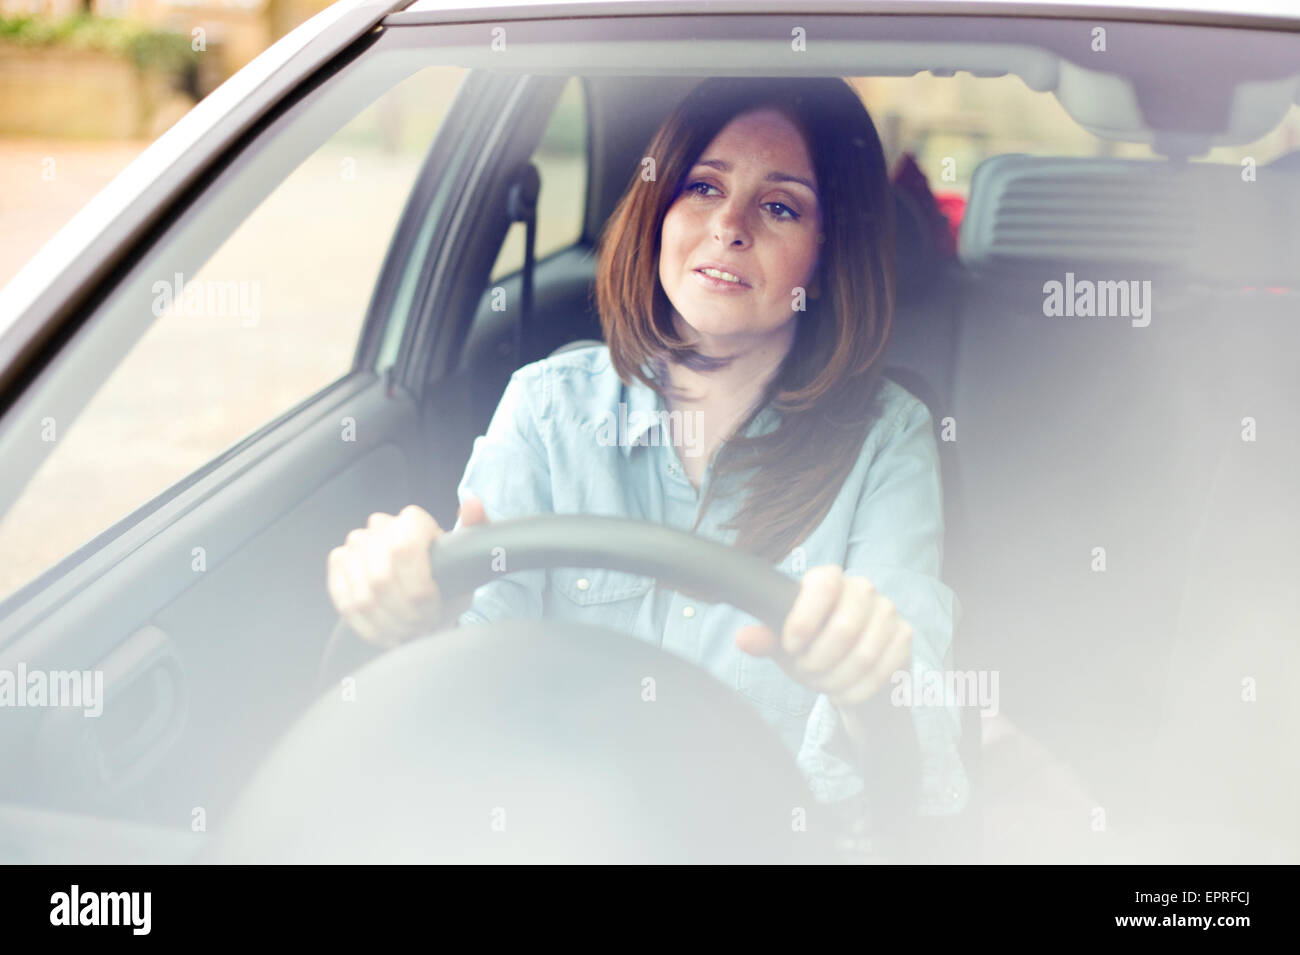 young woman driving her car looking anxious Stock Photo